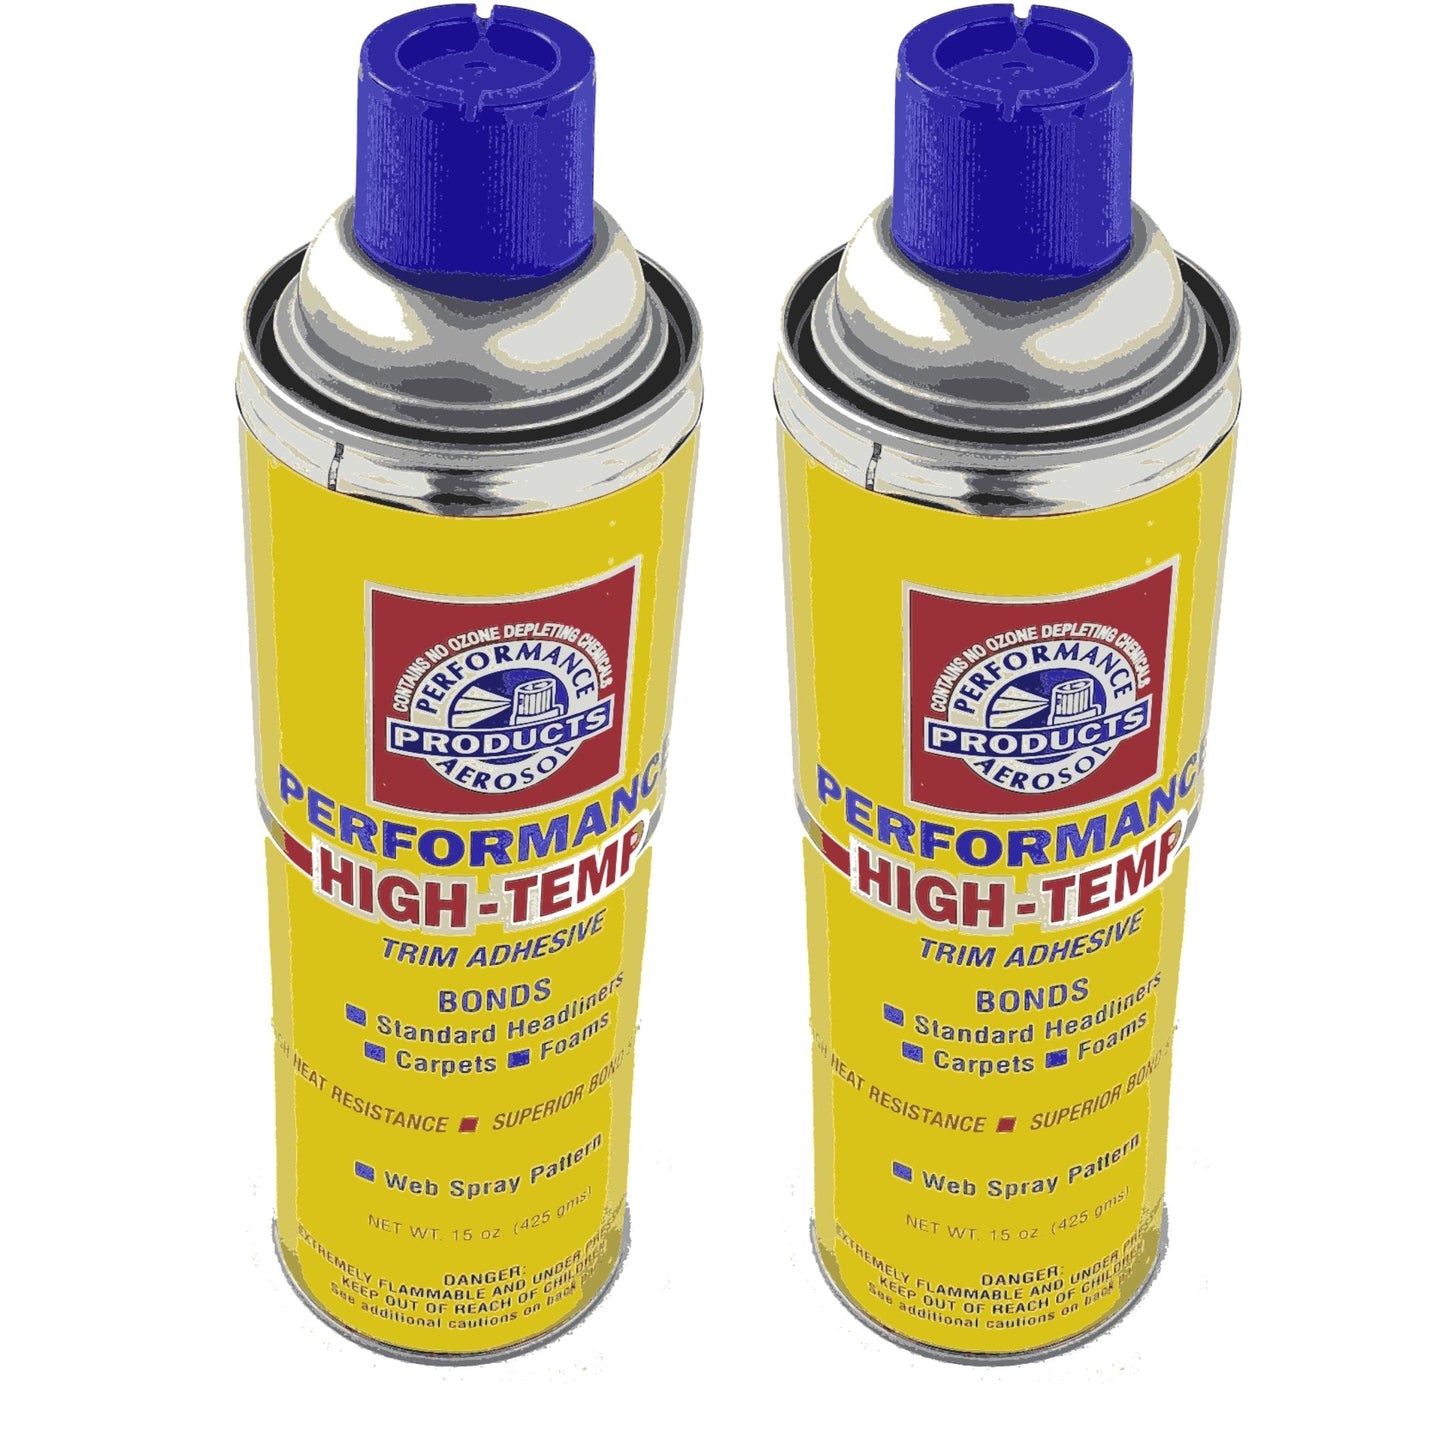 Spray Glue Adhesive Performance High Temp 12 OZ Cans of Headliners - Headliner Magic adhesive, cans, high, performance, spray, temp